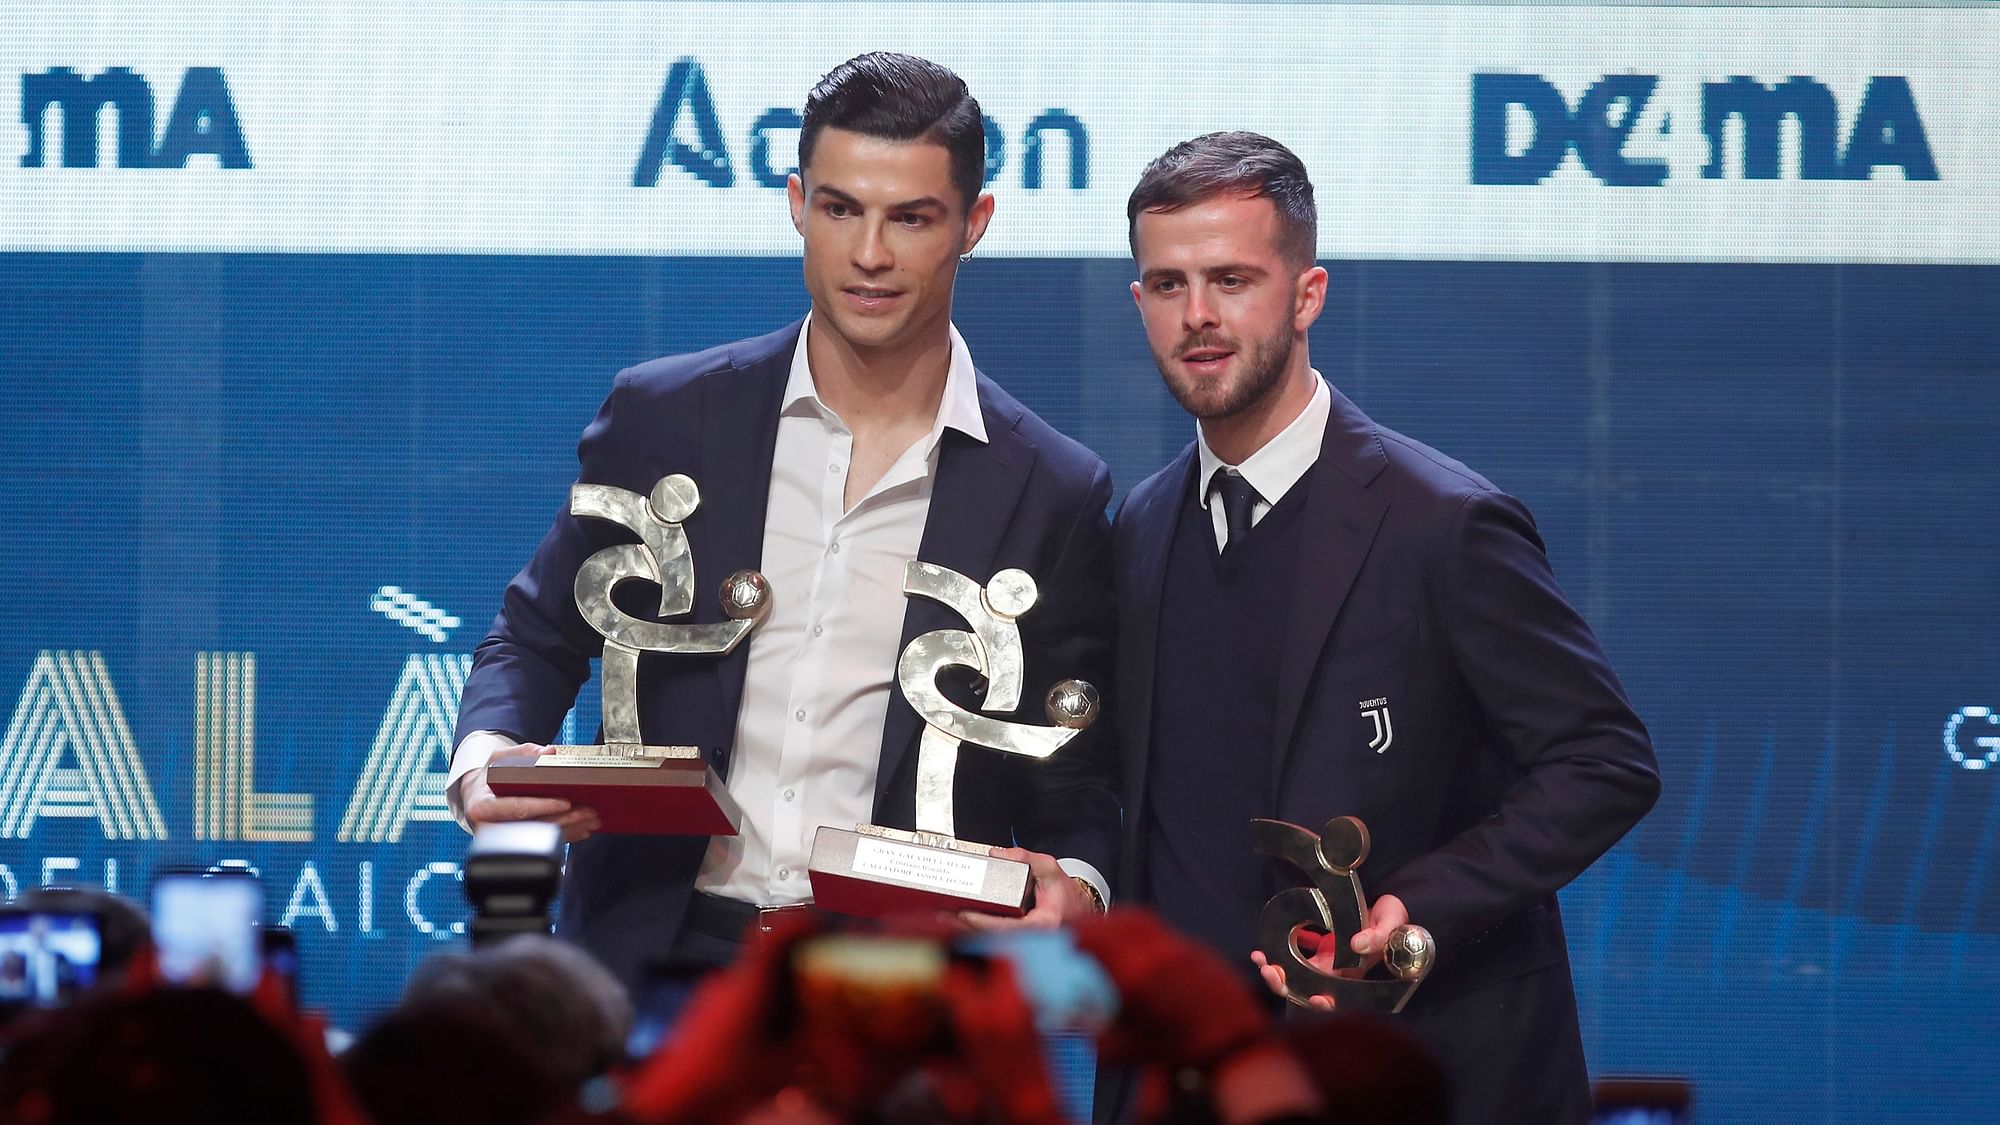 Juventus’ Cristiano Ronaldo, left, stands with the trophy for best Italian Serie A player, as he poses with his teammate Miralem Pjanic, winner of the best Italian Serie A midfielder, during the Gran Gala’ soccer awards ceremony, in Milan, Italy, Monday, Dec. 2, 2019.&nbsp;